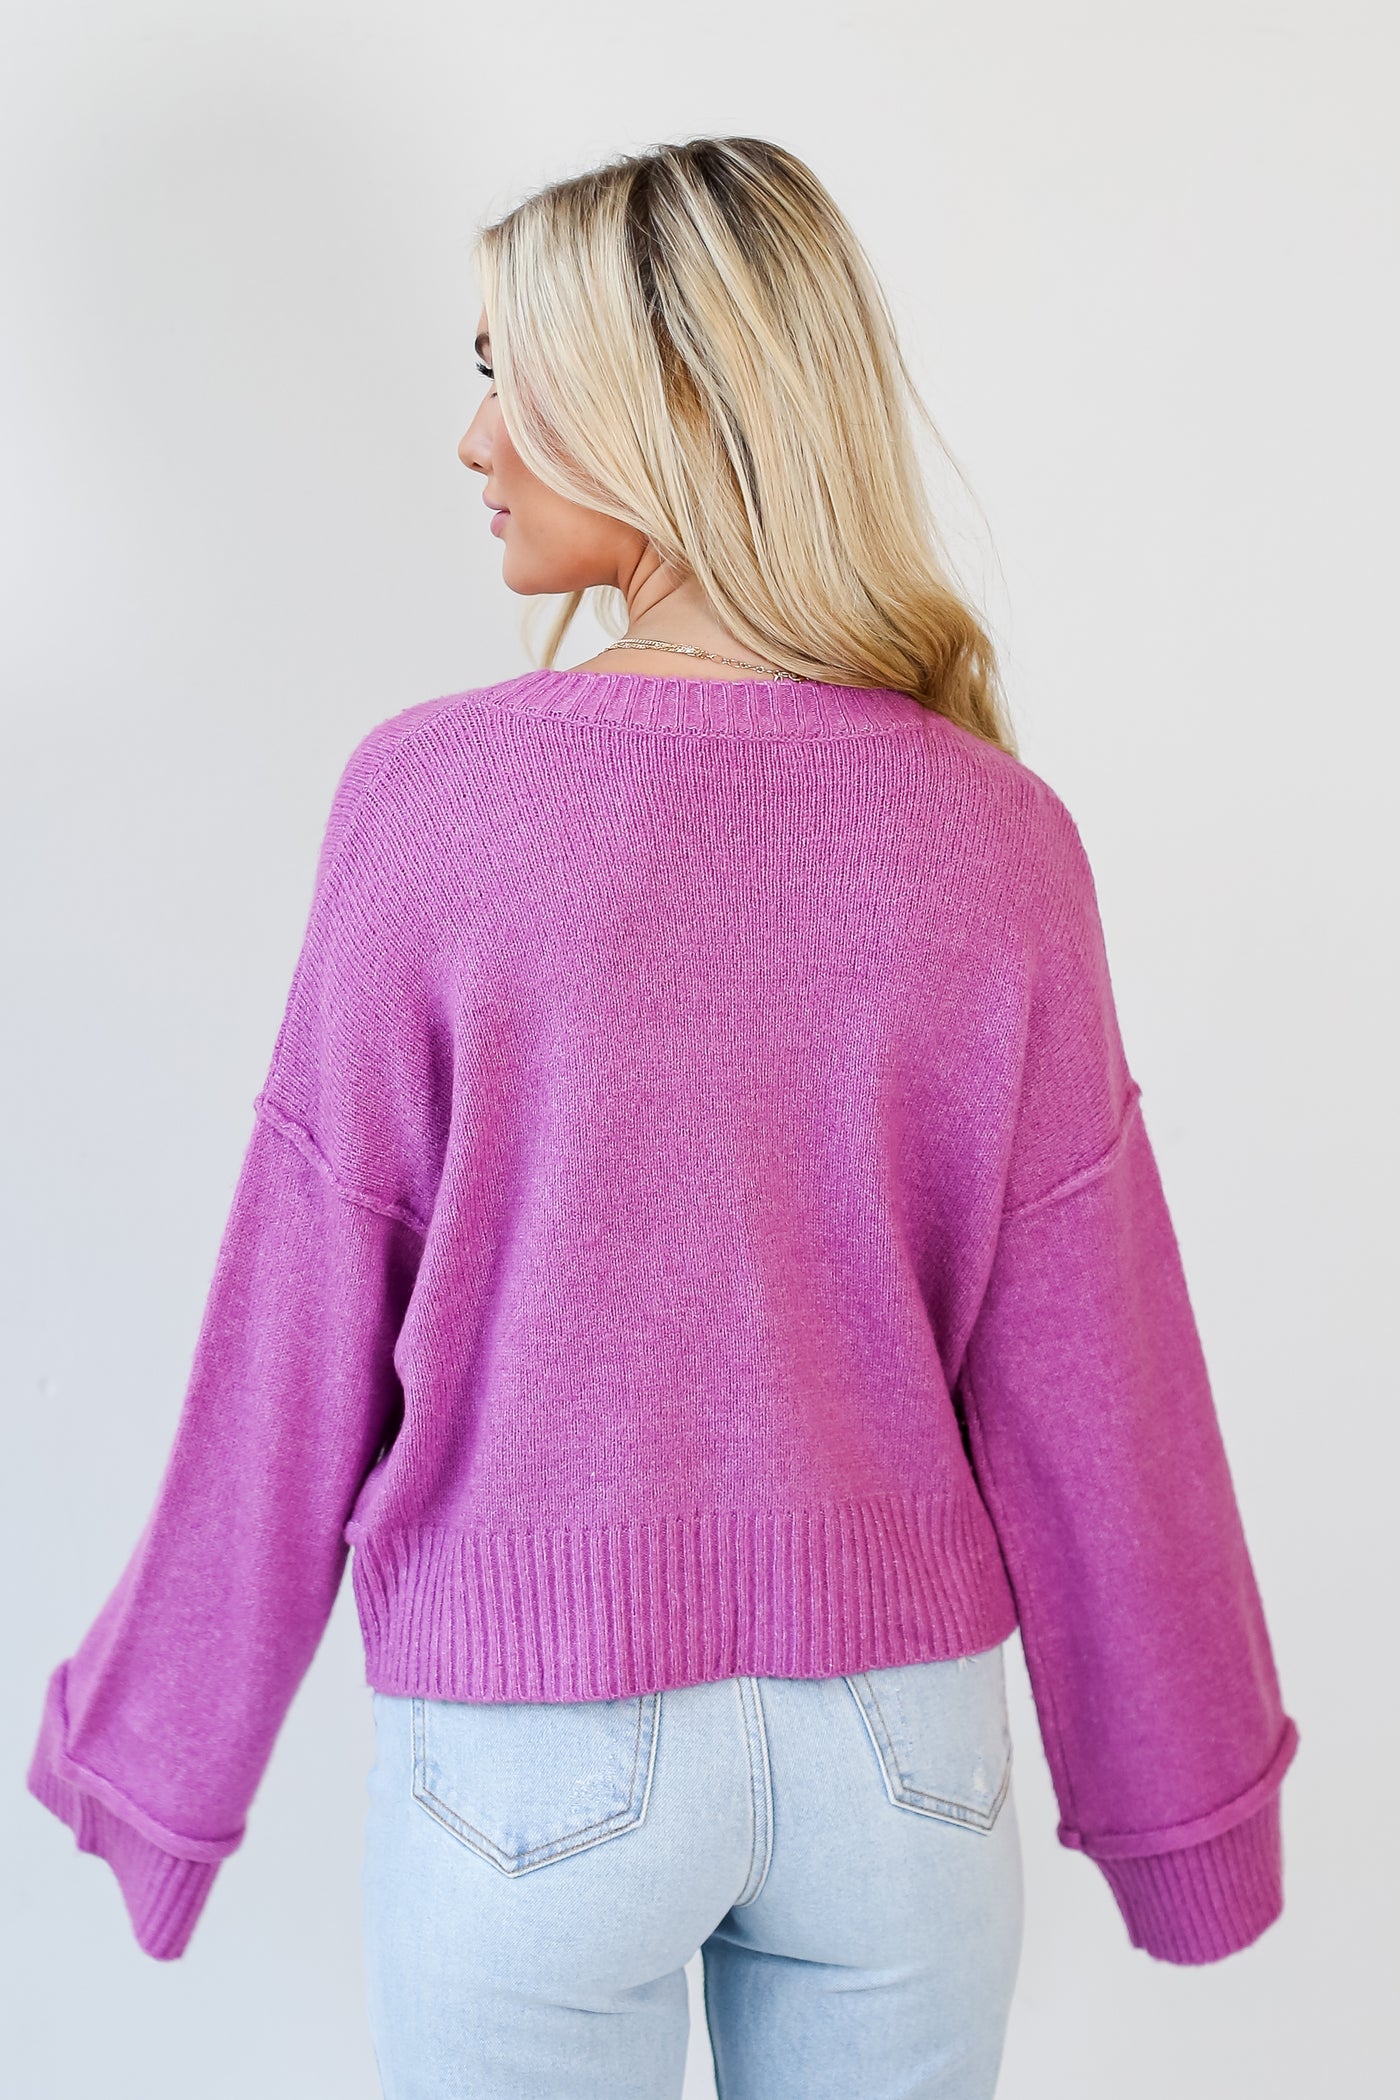 pink Sweater back view